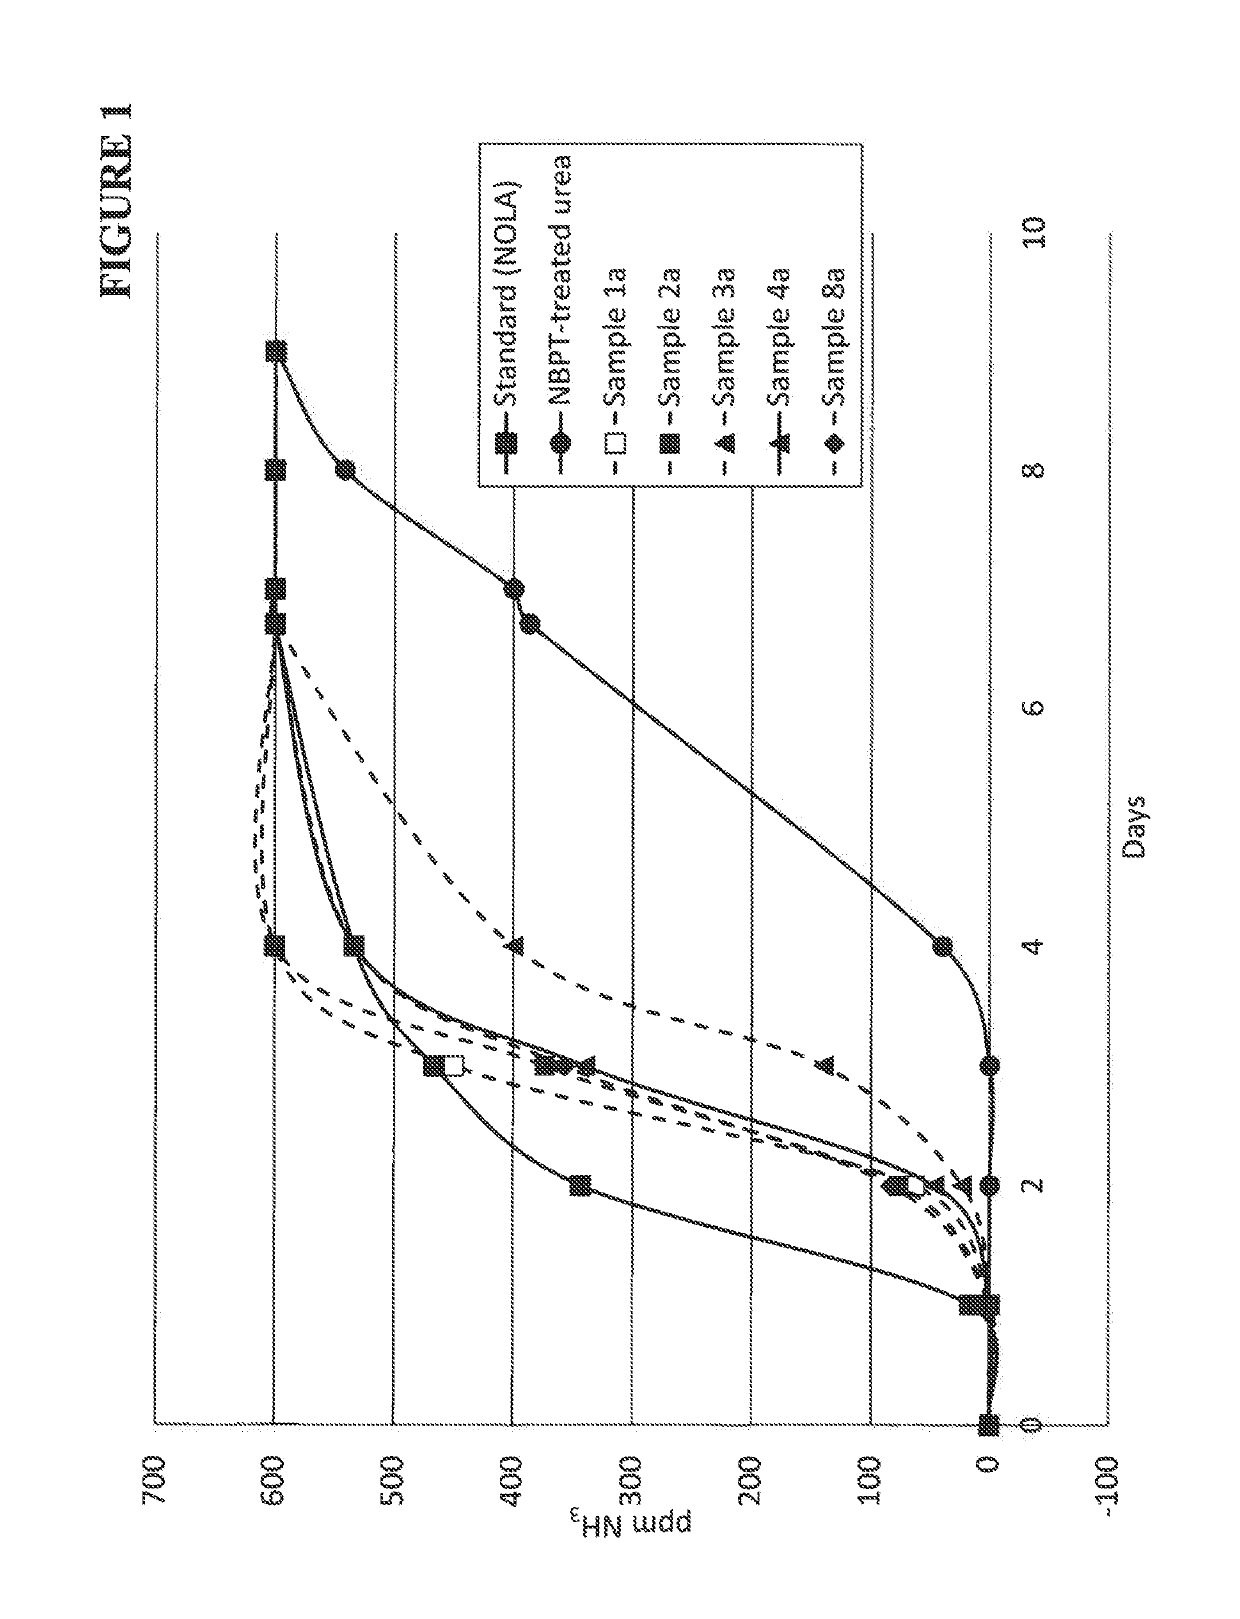 Composition containing N-(n-butyl) thiophosphoric triamide adducts and reaction products